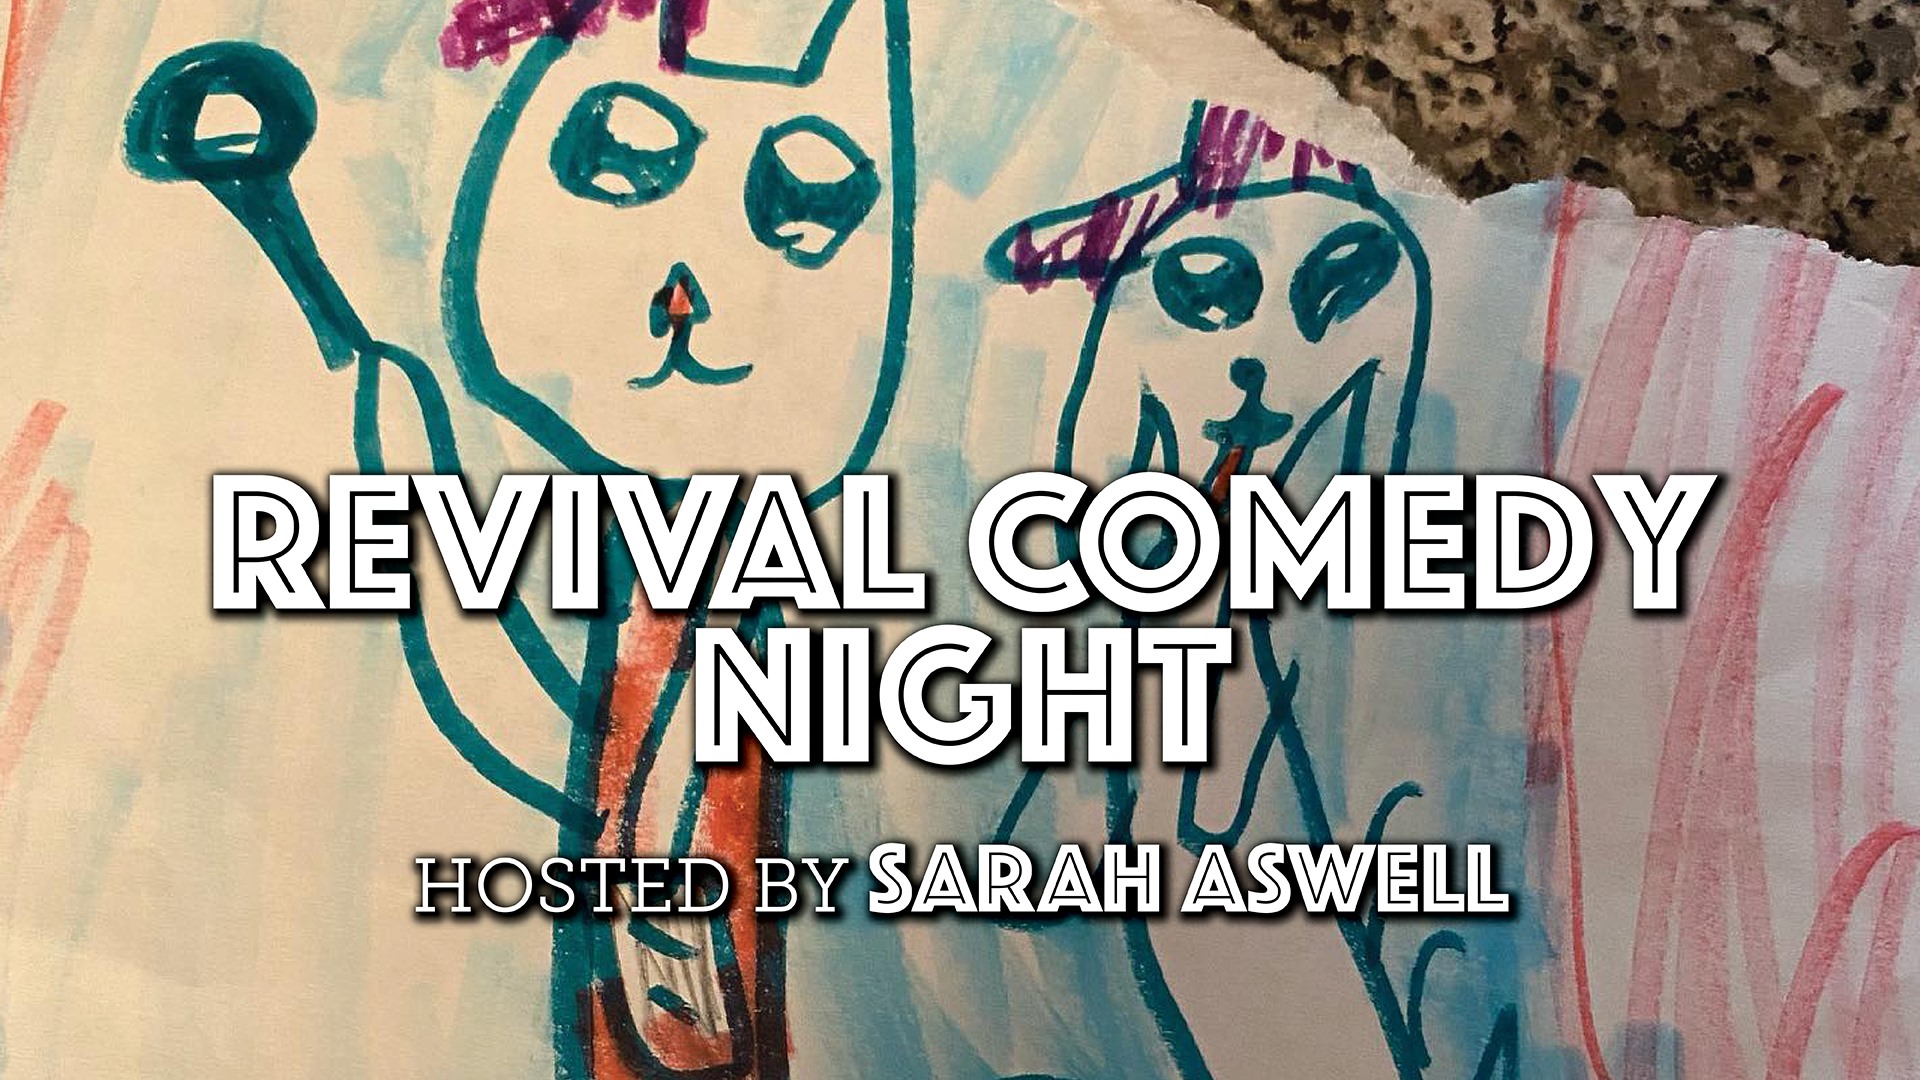 Revival Comedy Night for Pintler Pets Humane Society